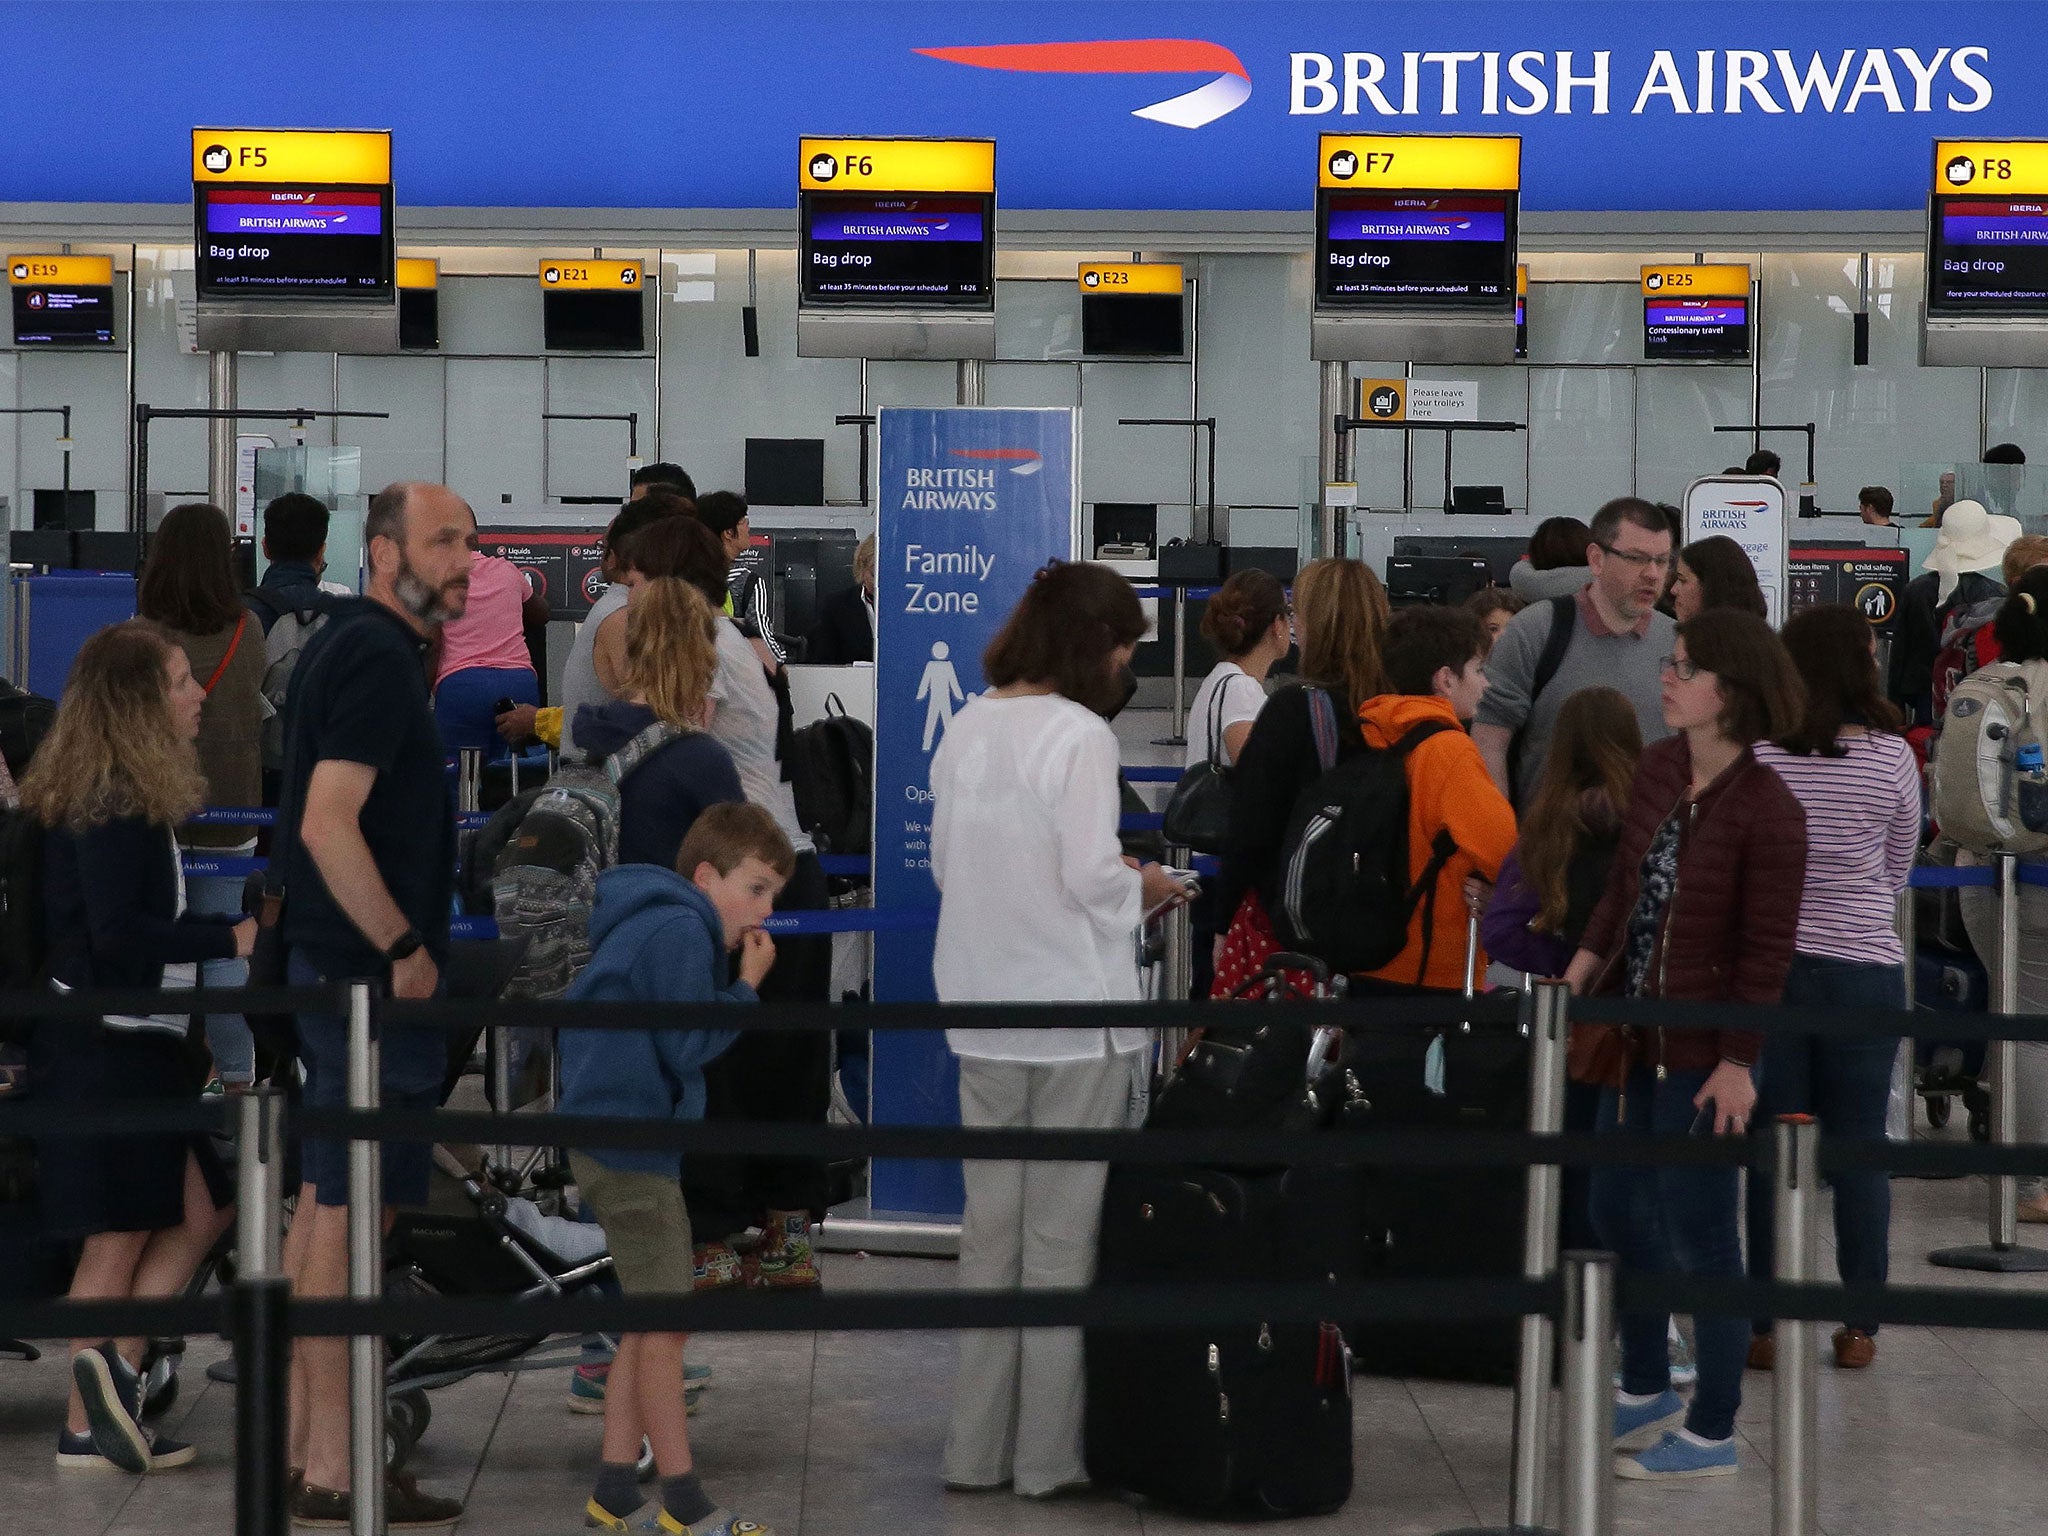 Passengers queuing with their luggage at Heathrow could become a thing of the past